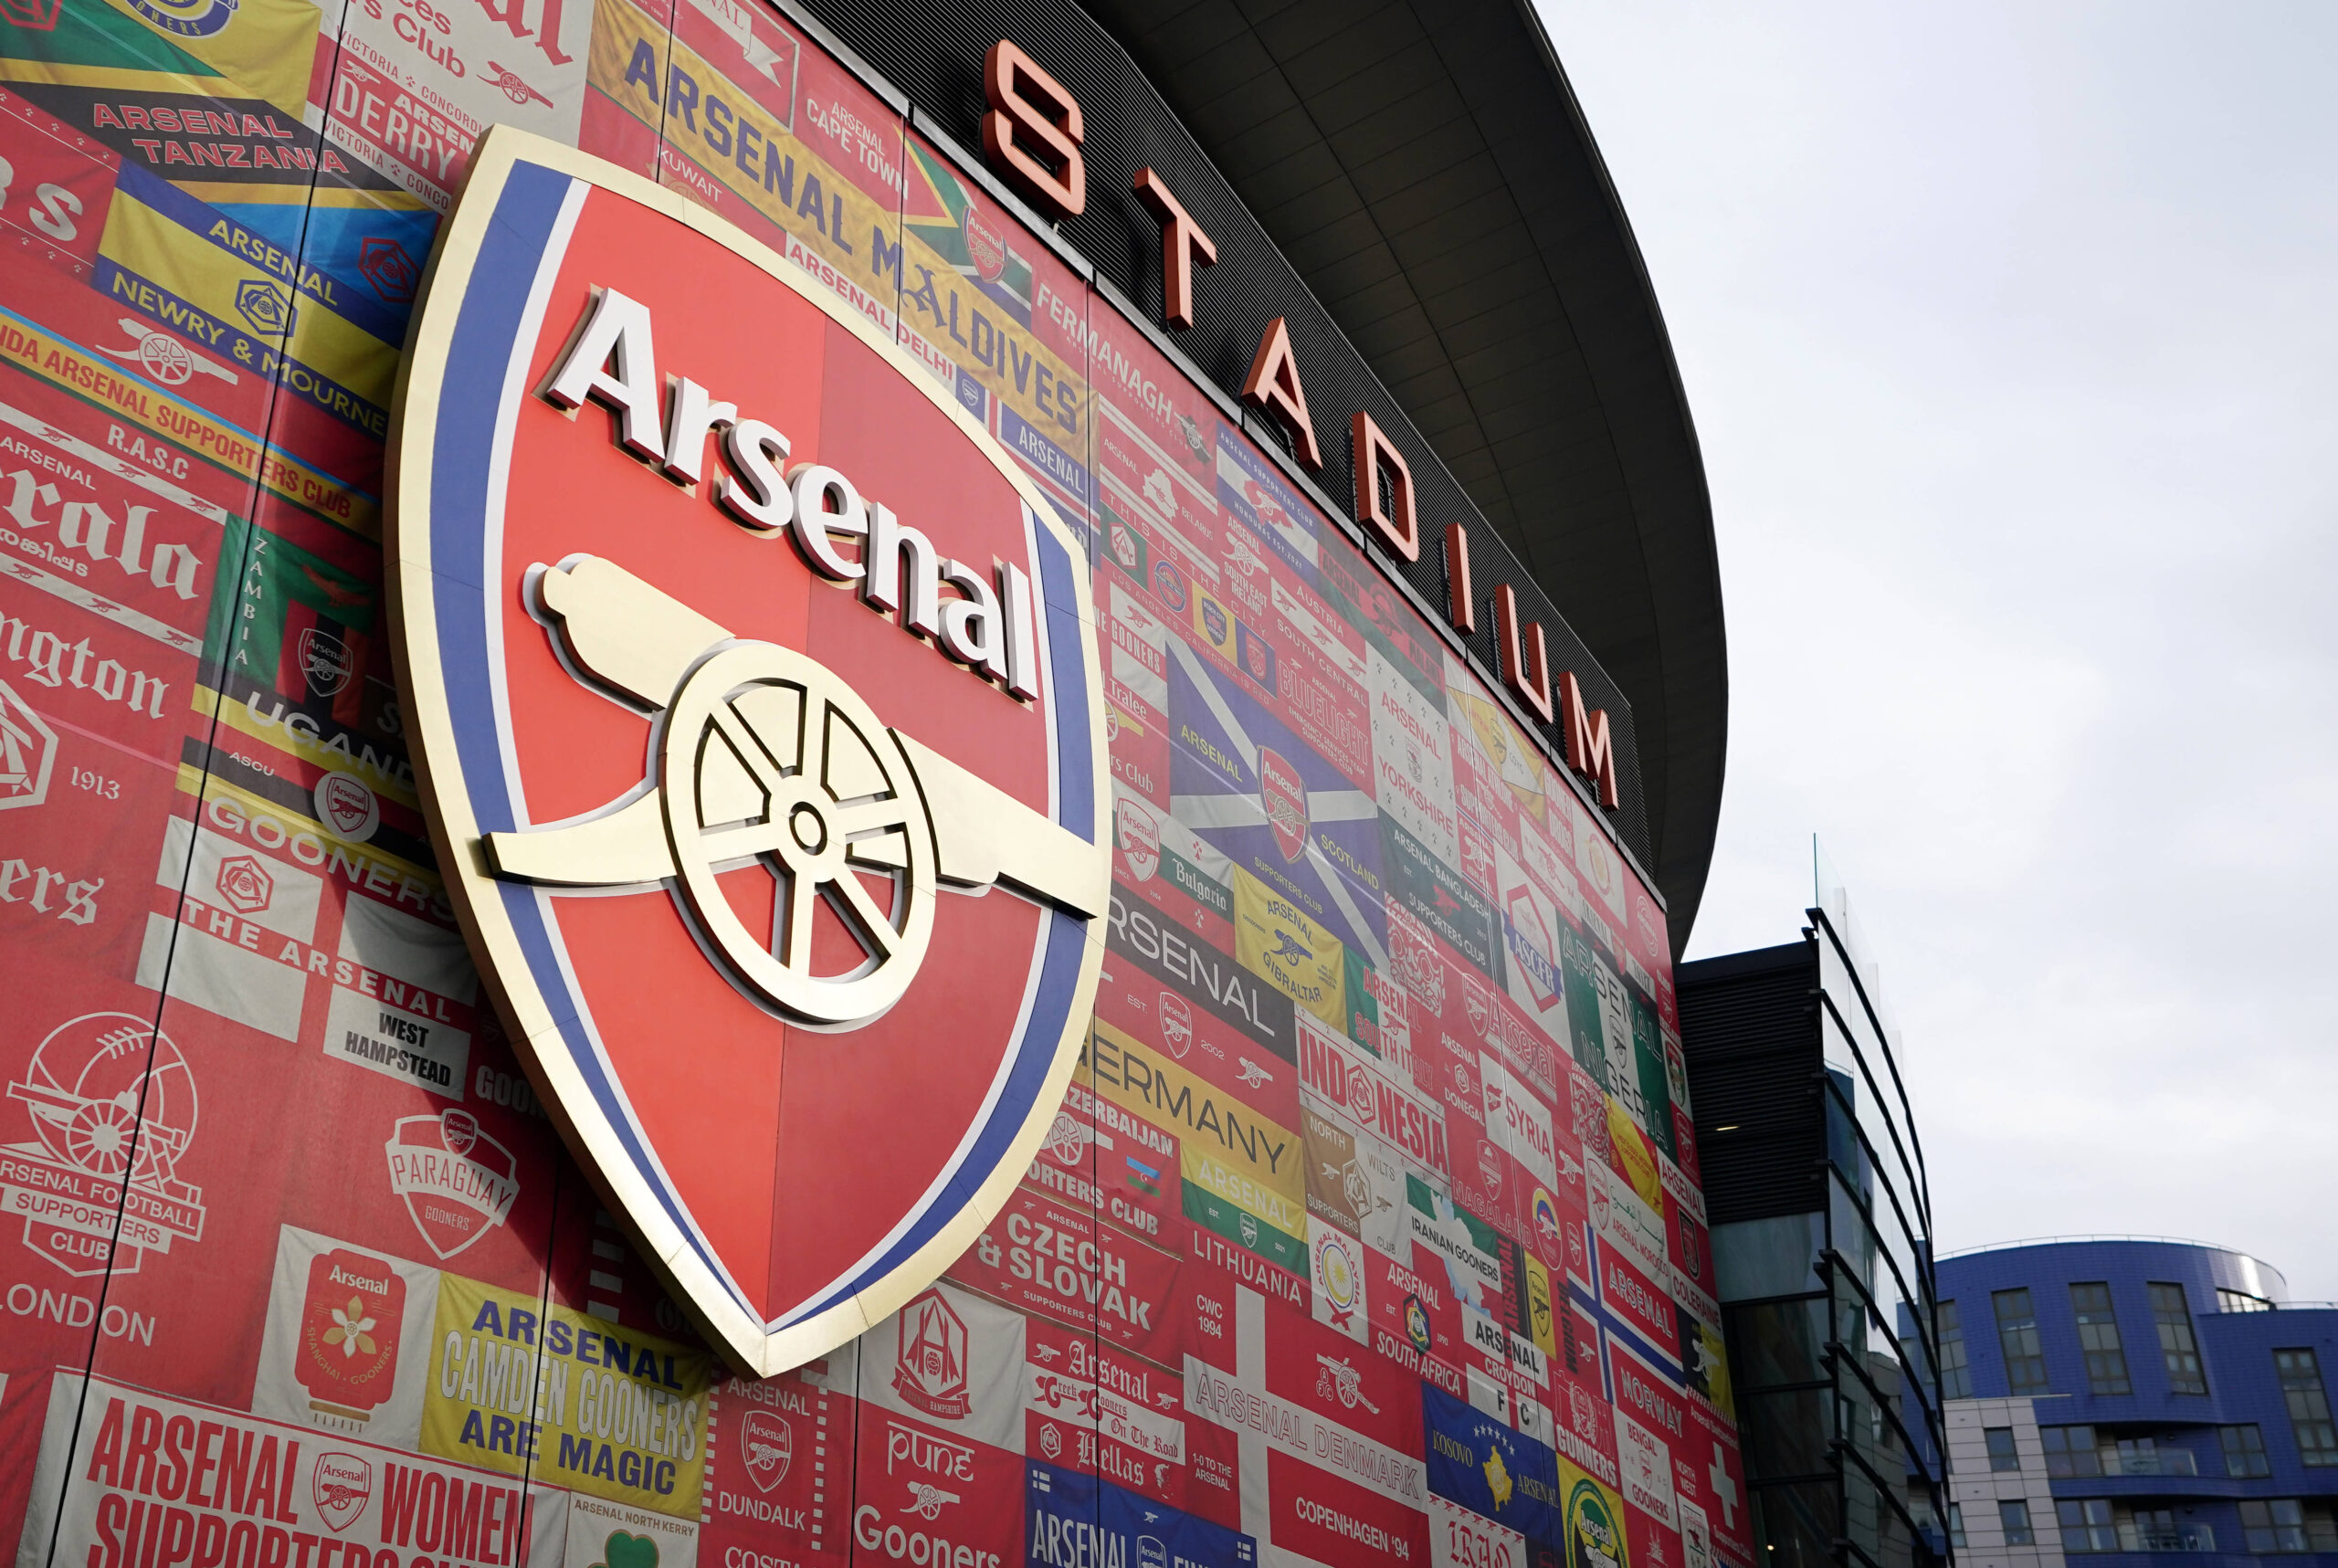 External view of Arsenal's Emirates stadium showing the club badge in front of an array of flags